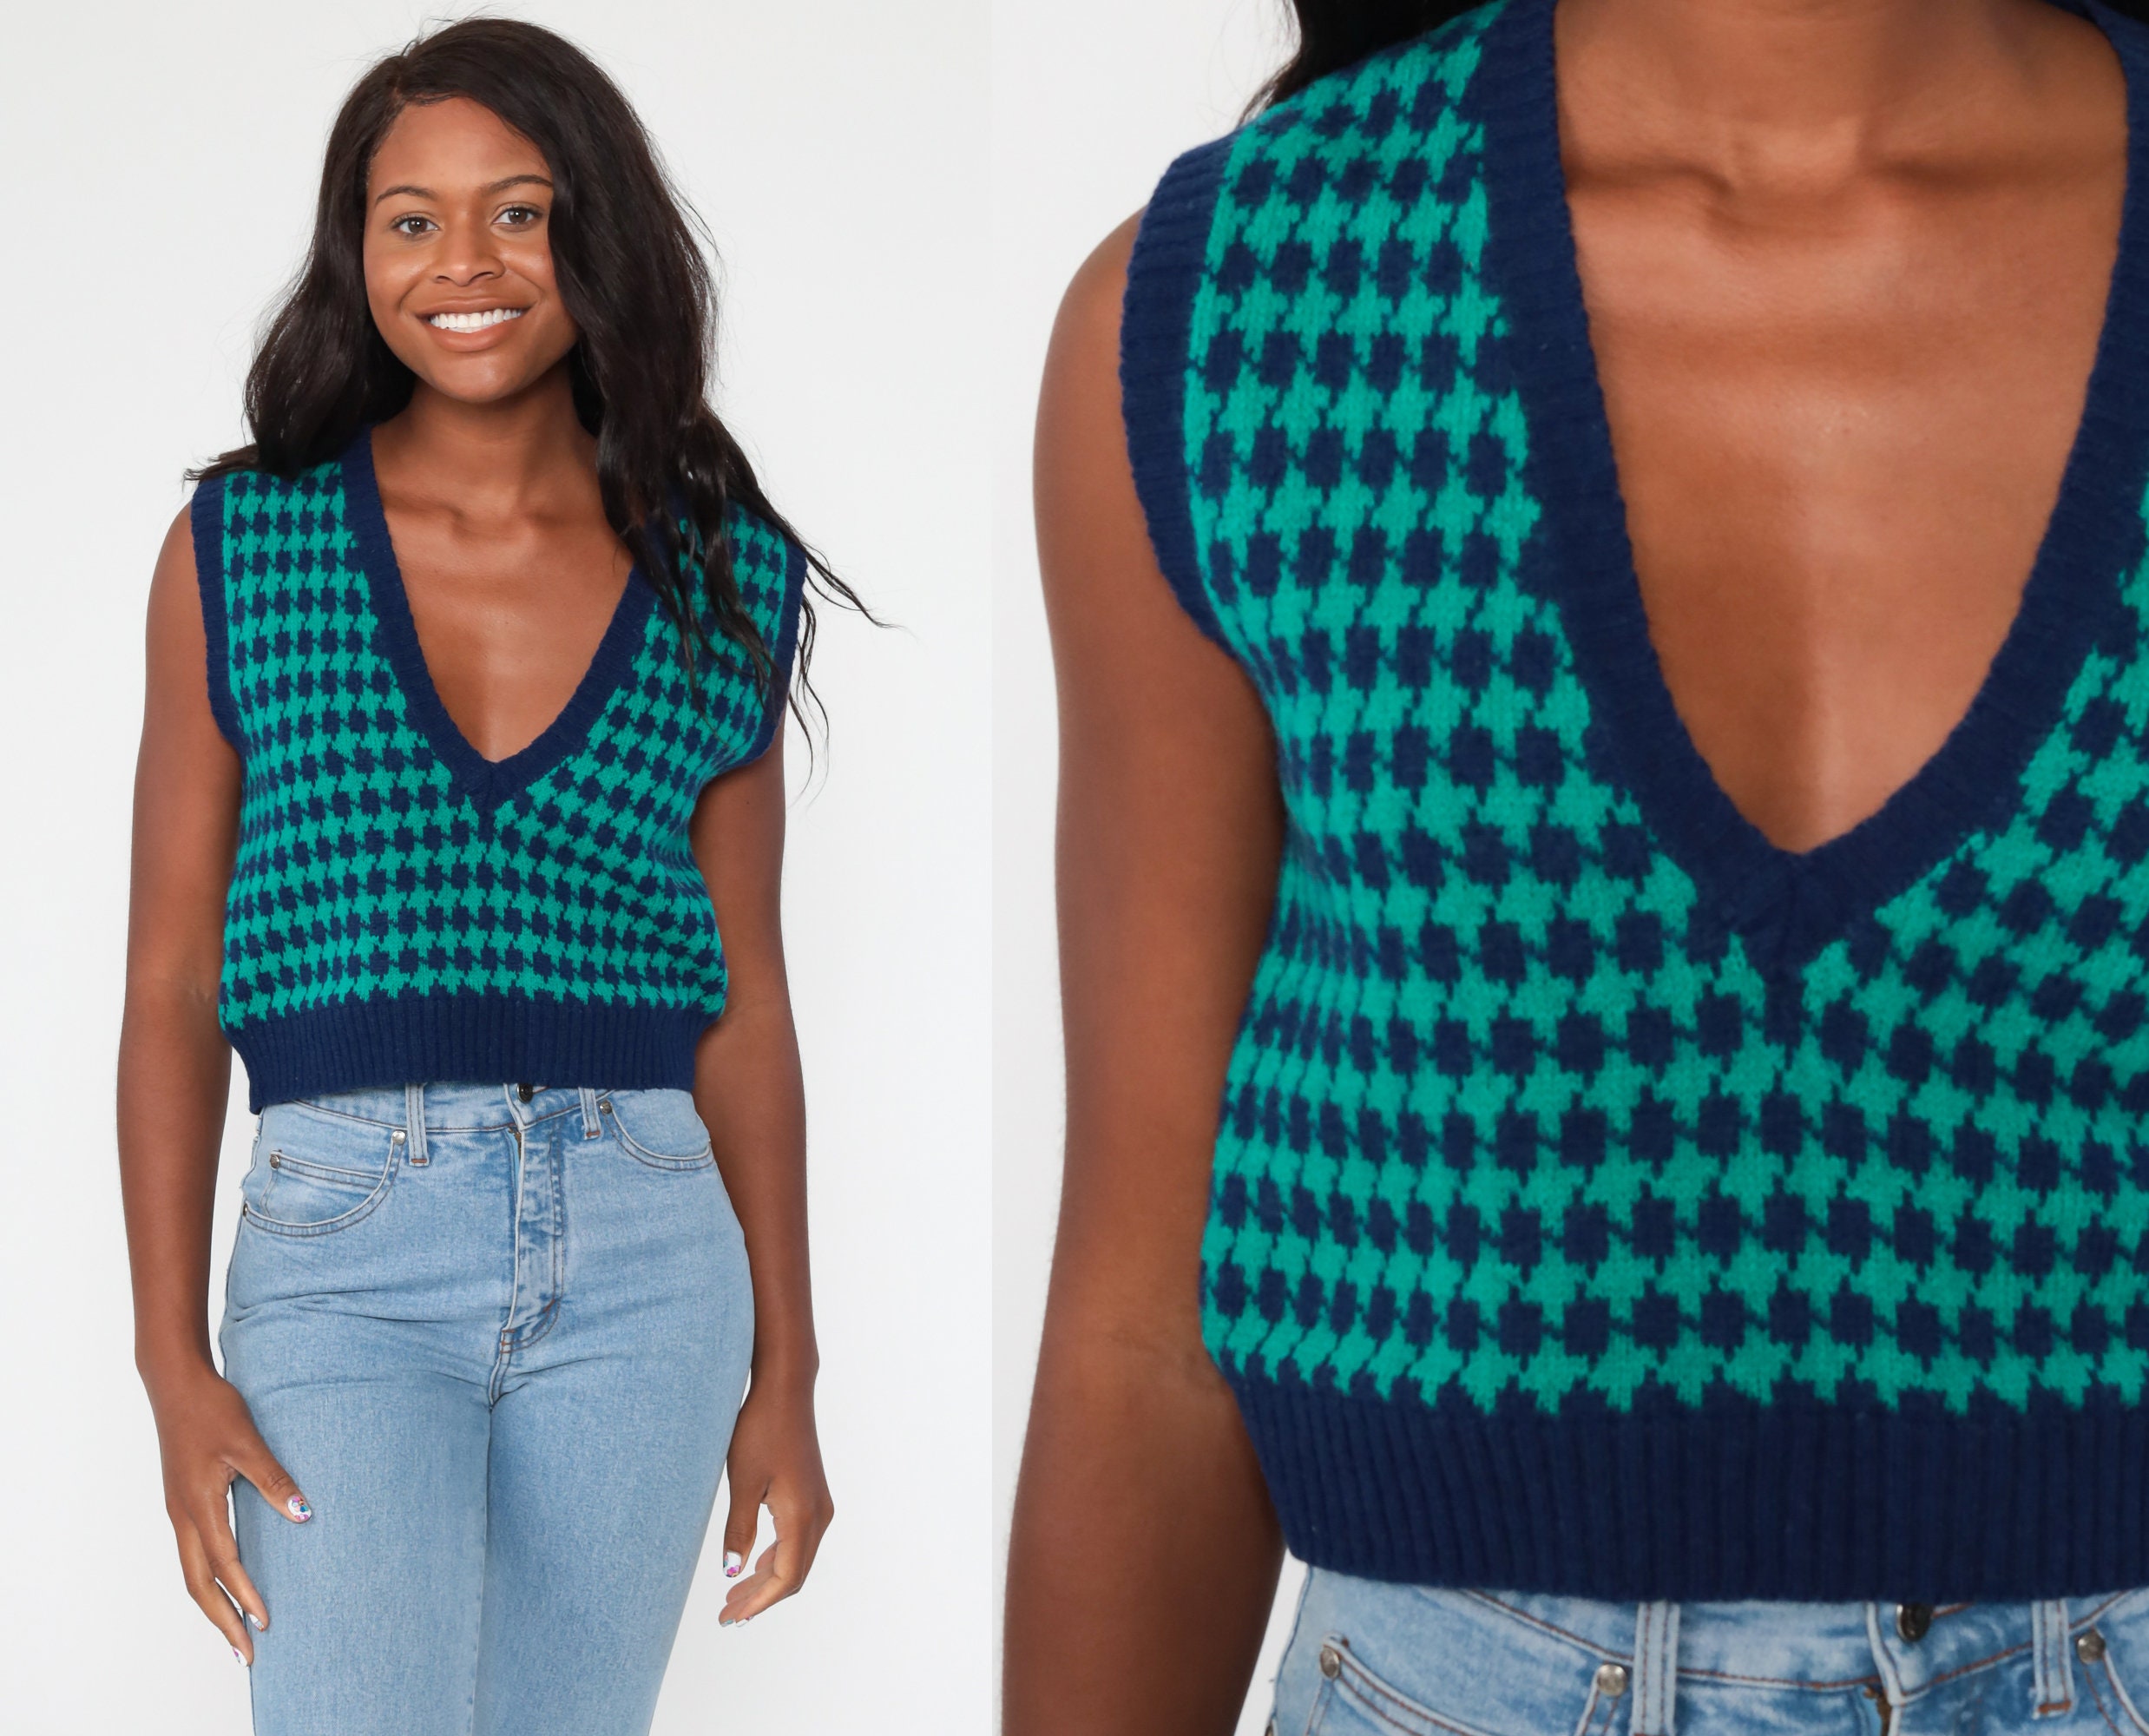 70s Sweater Vest Top Houndstooth Tank Top Knit Shirt Sweater Checkered Vest Blue Green V Neck 1970s Shirt Vintage Small